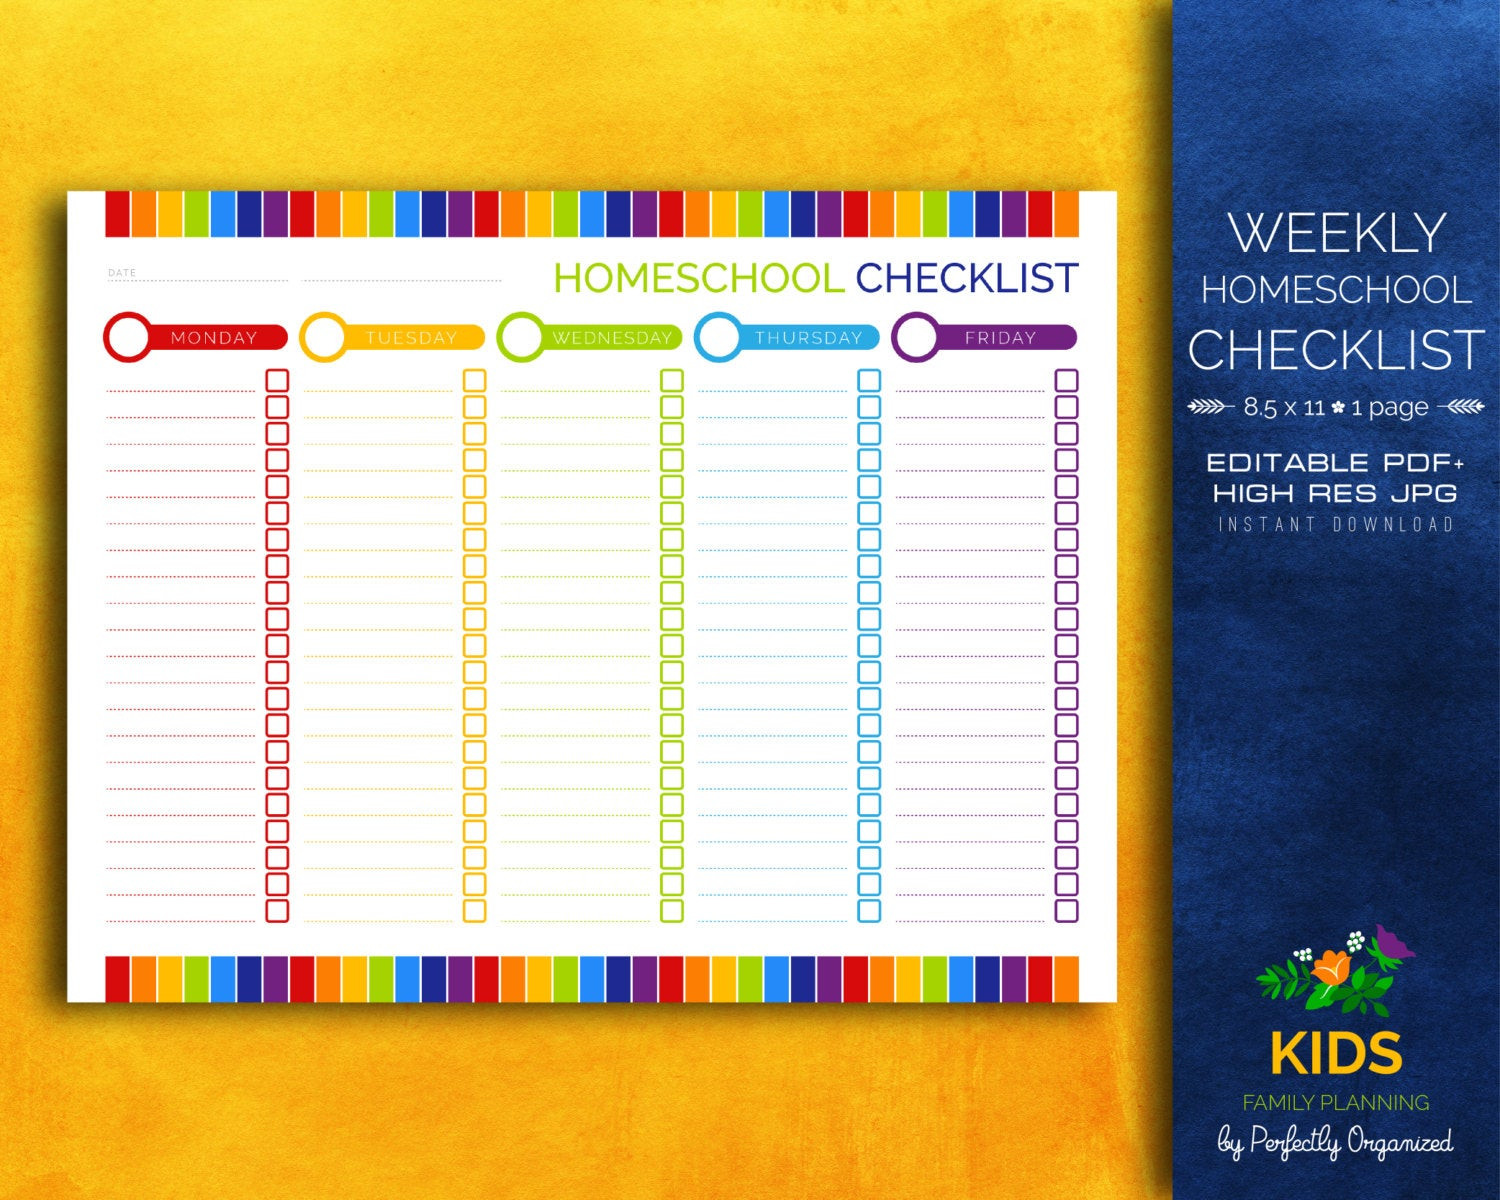 Lesson Plan for Kids Weekly Homeschool Checklist Homeschool Lesson Plan Kids